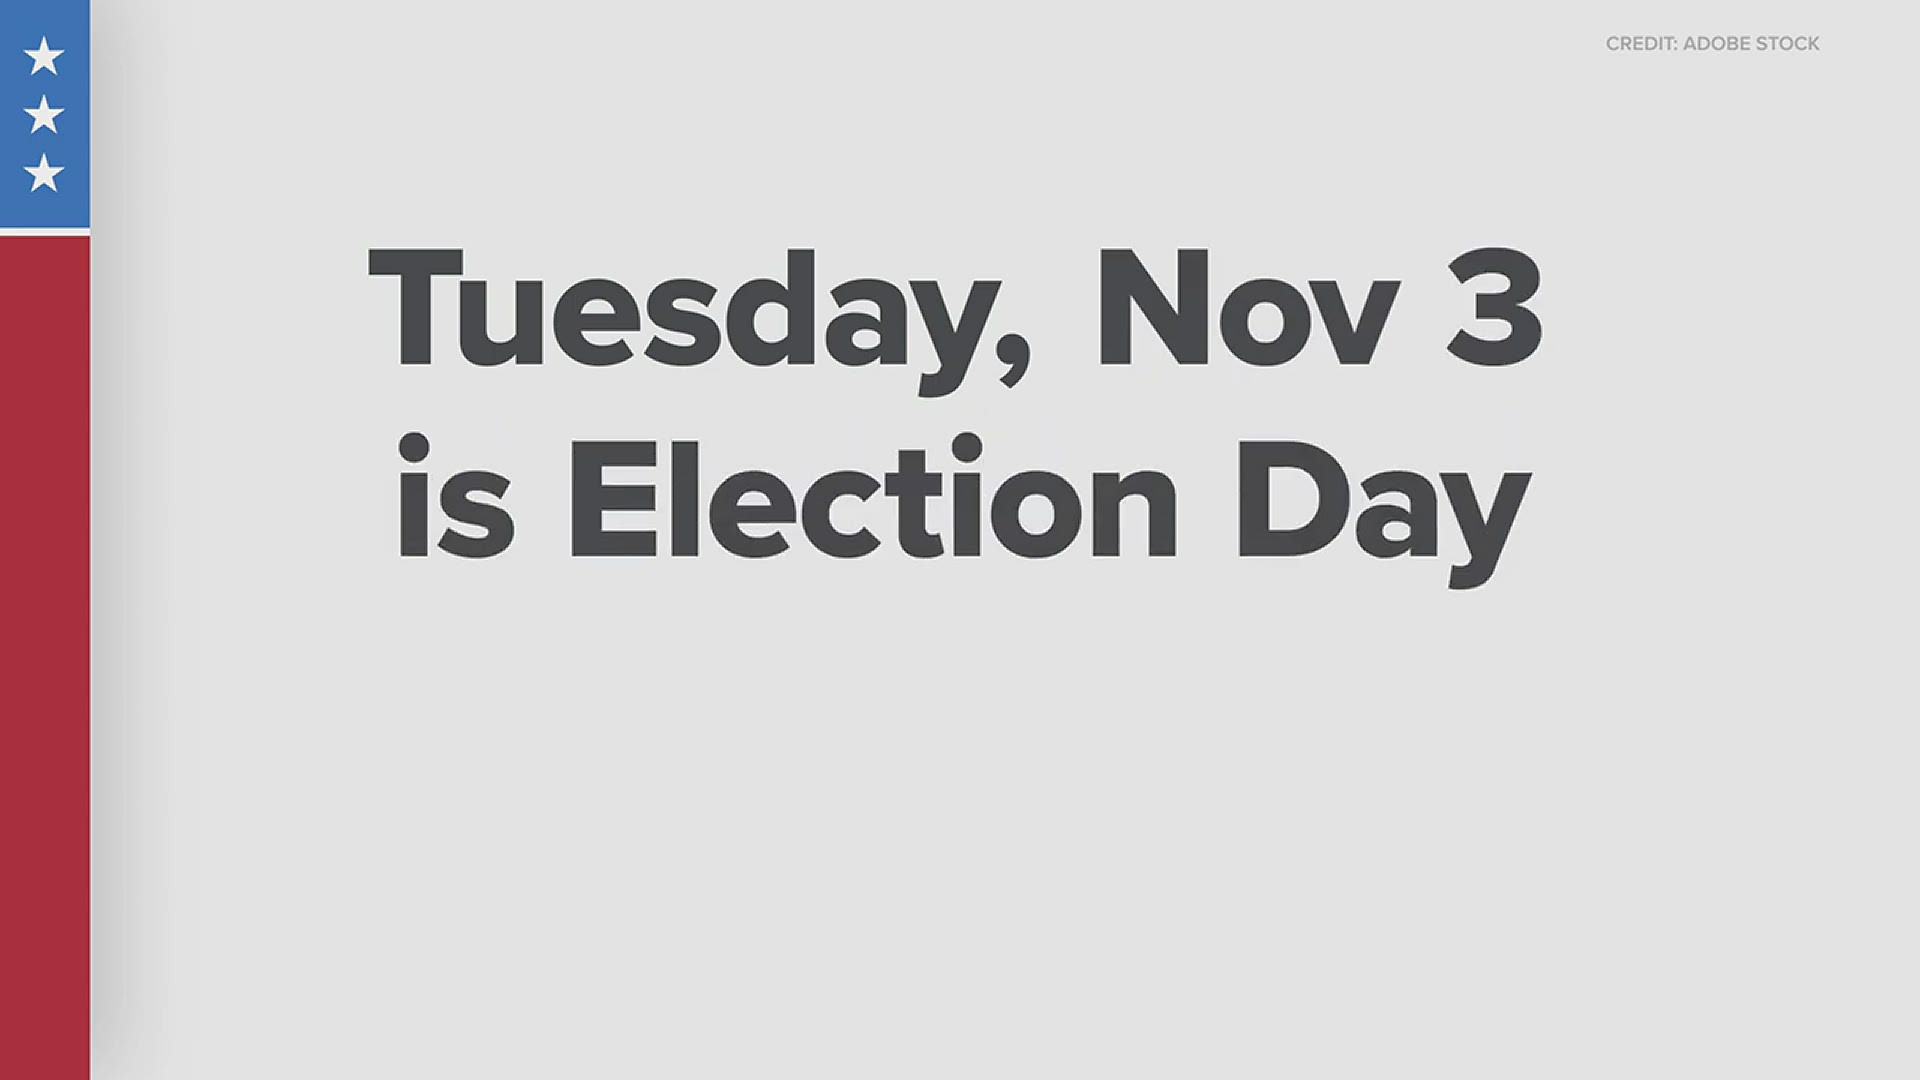 Ohio polls open at 6:30 a.m. and close at 7:30 p.m. - the same deadline when all absentee ballots must be dropped off.